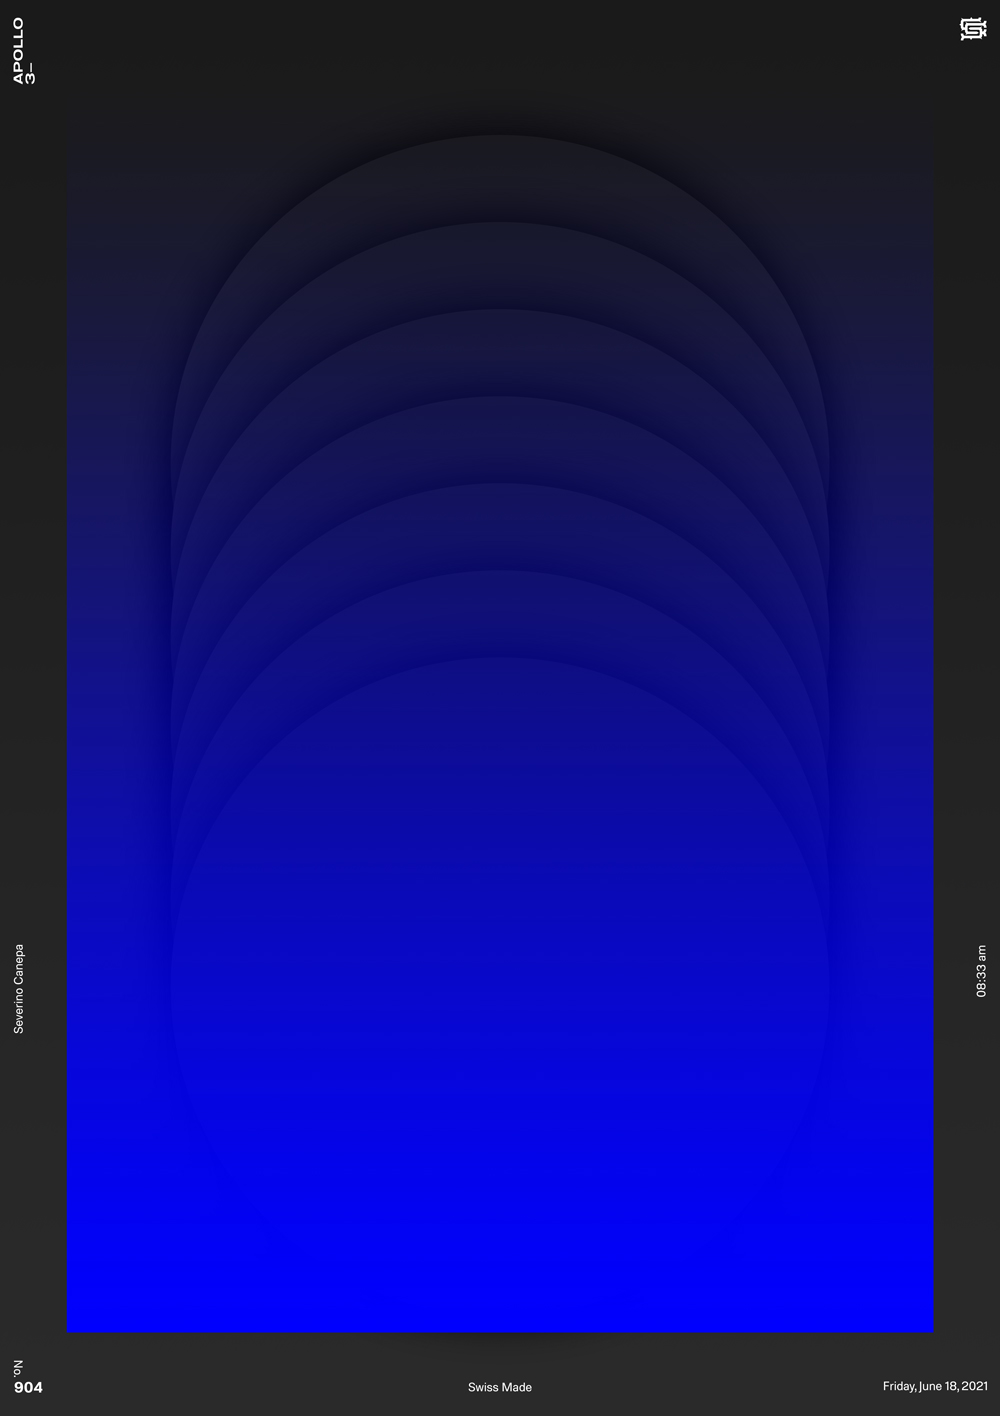 Minimalist digital creation realized with a large blue rectangle with transparency